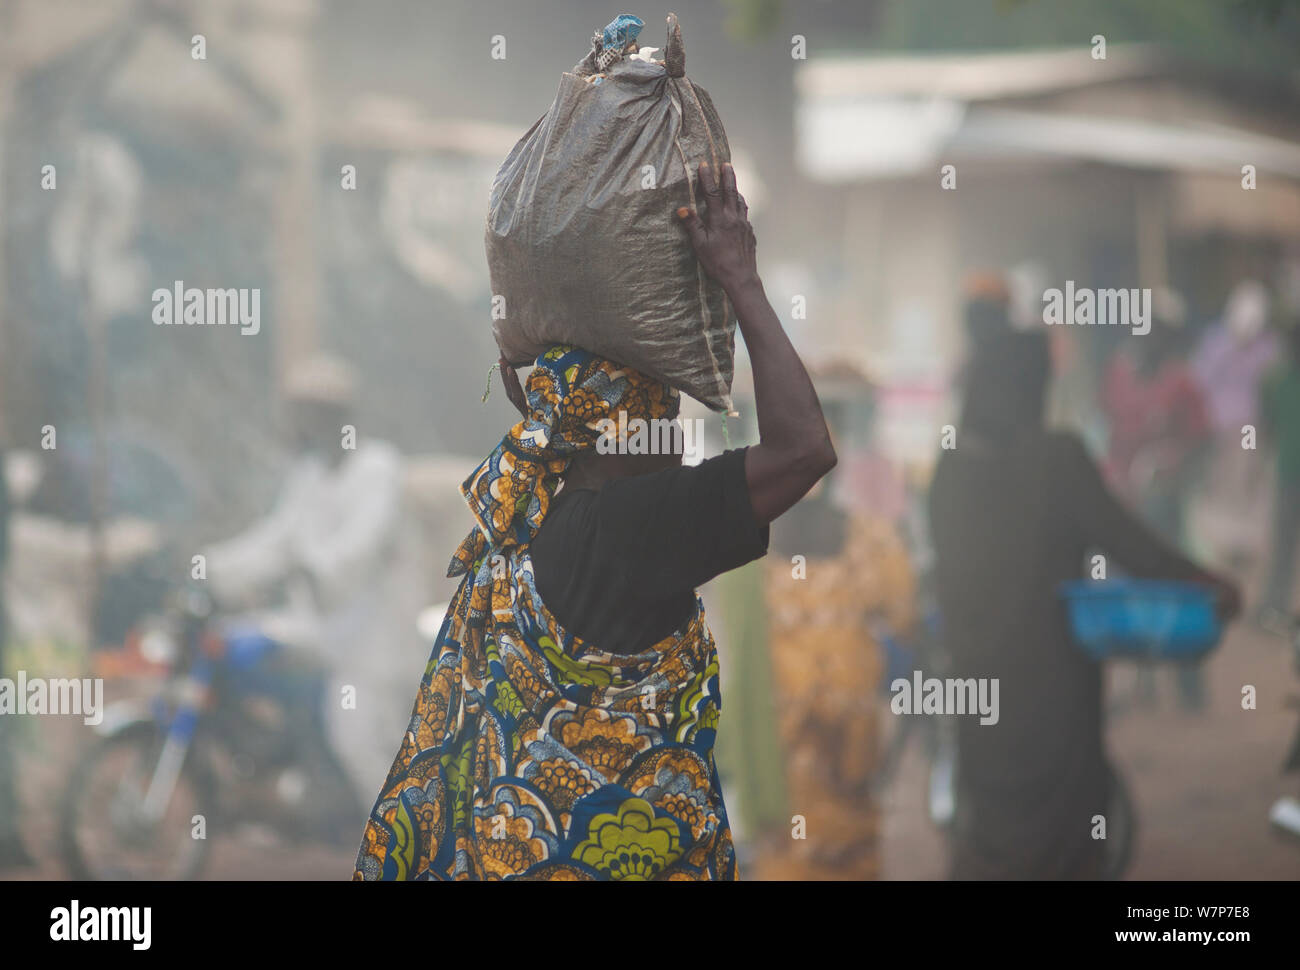 Street market with woman carrying bag of charcoal on her head. Maroua, Northern Cameroon, September 2009 Stock Photo